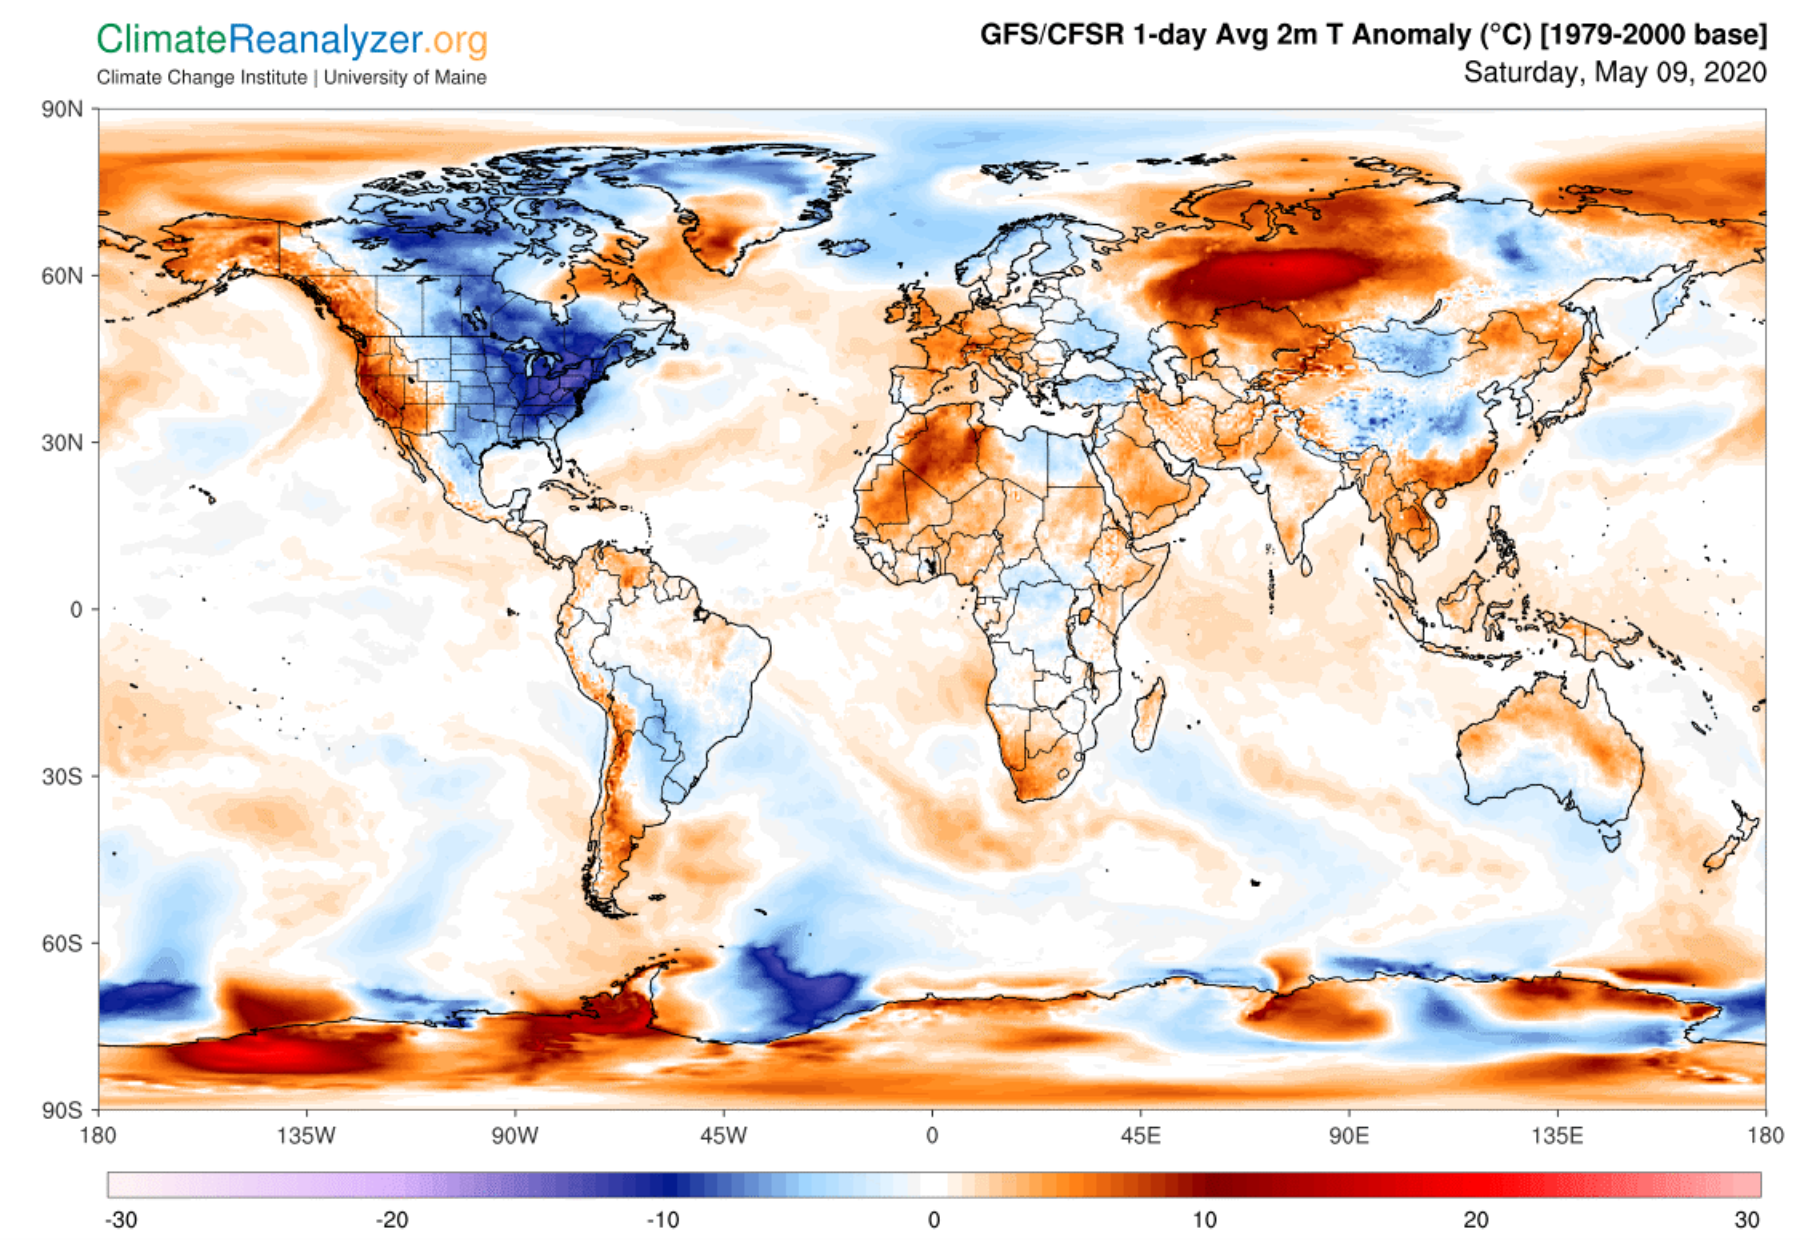 One-day average worldwide temperature anomaly map for May 9th